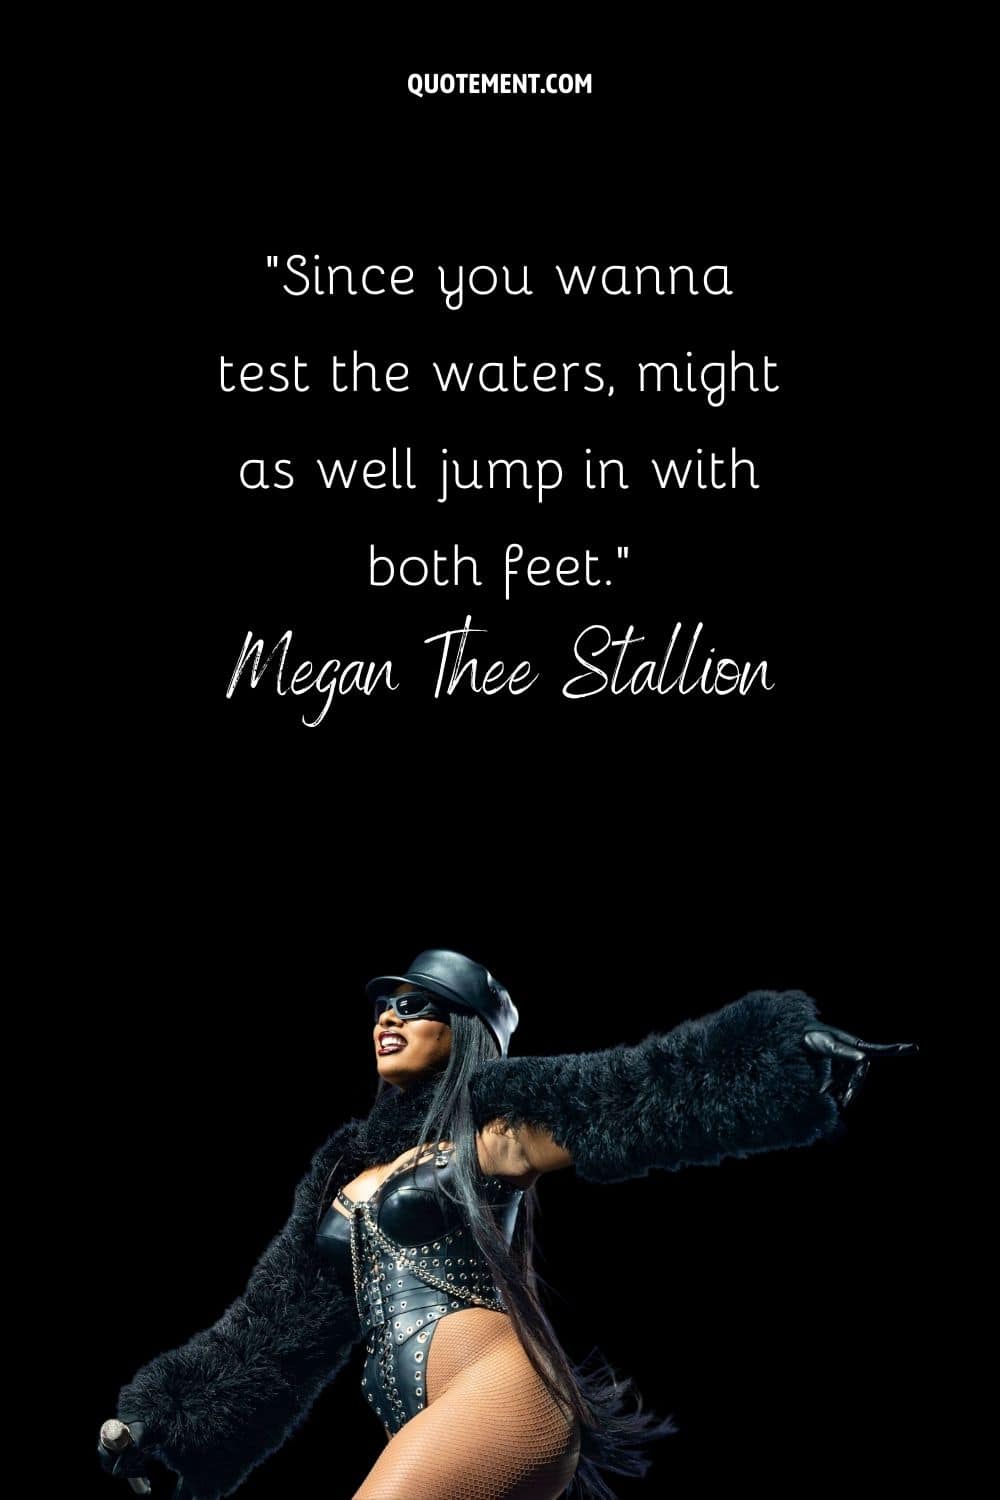 “Since you wanna test the waters, might as well jump in with both feet.” — Megan Thee Stallion